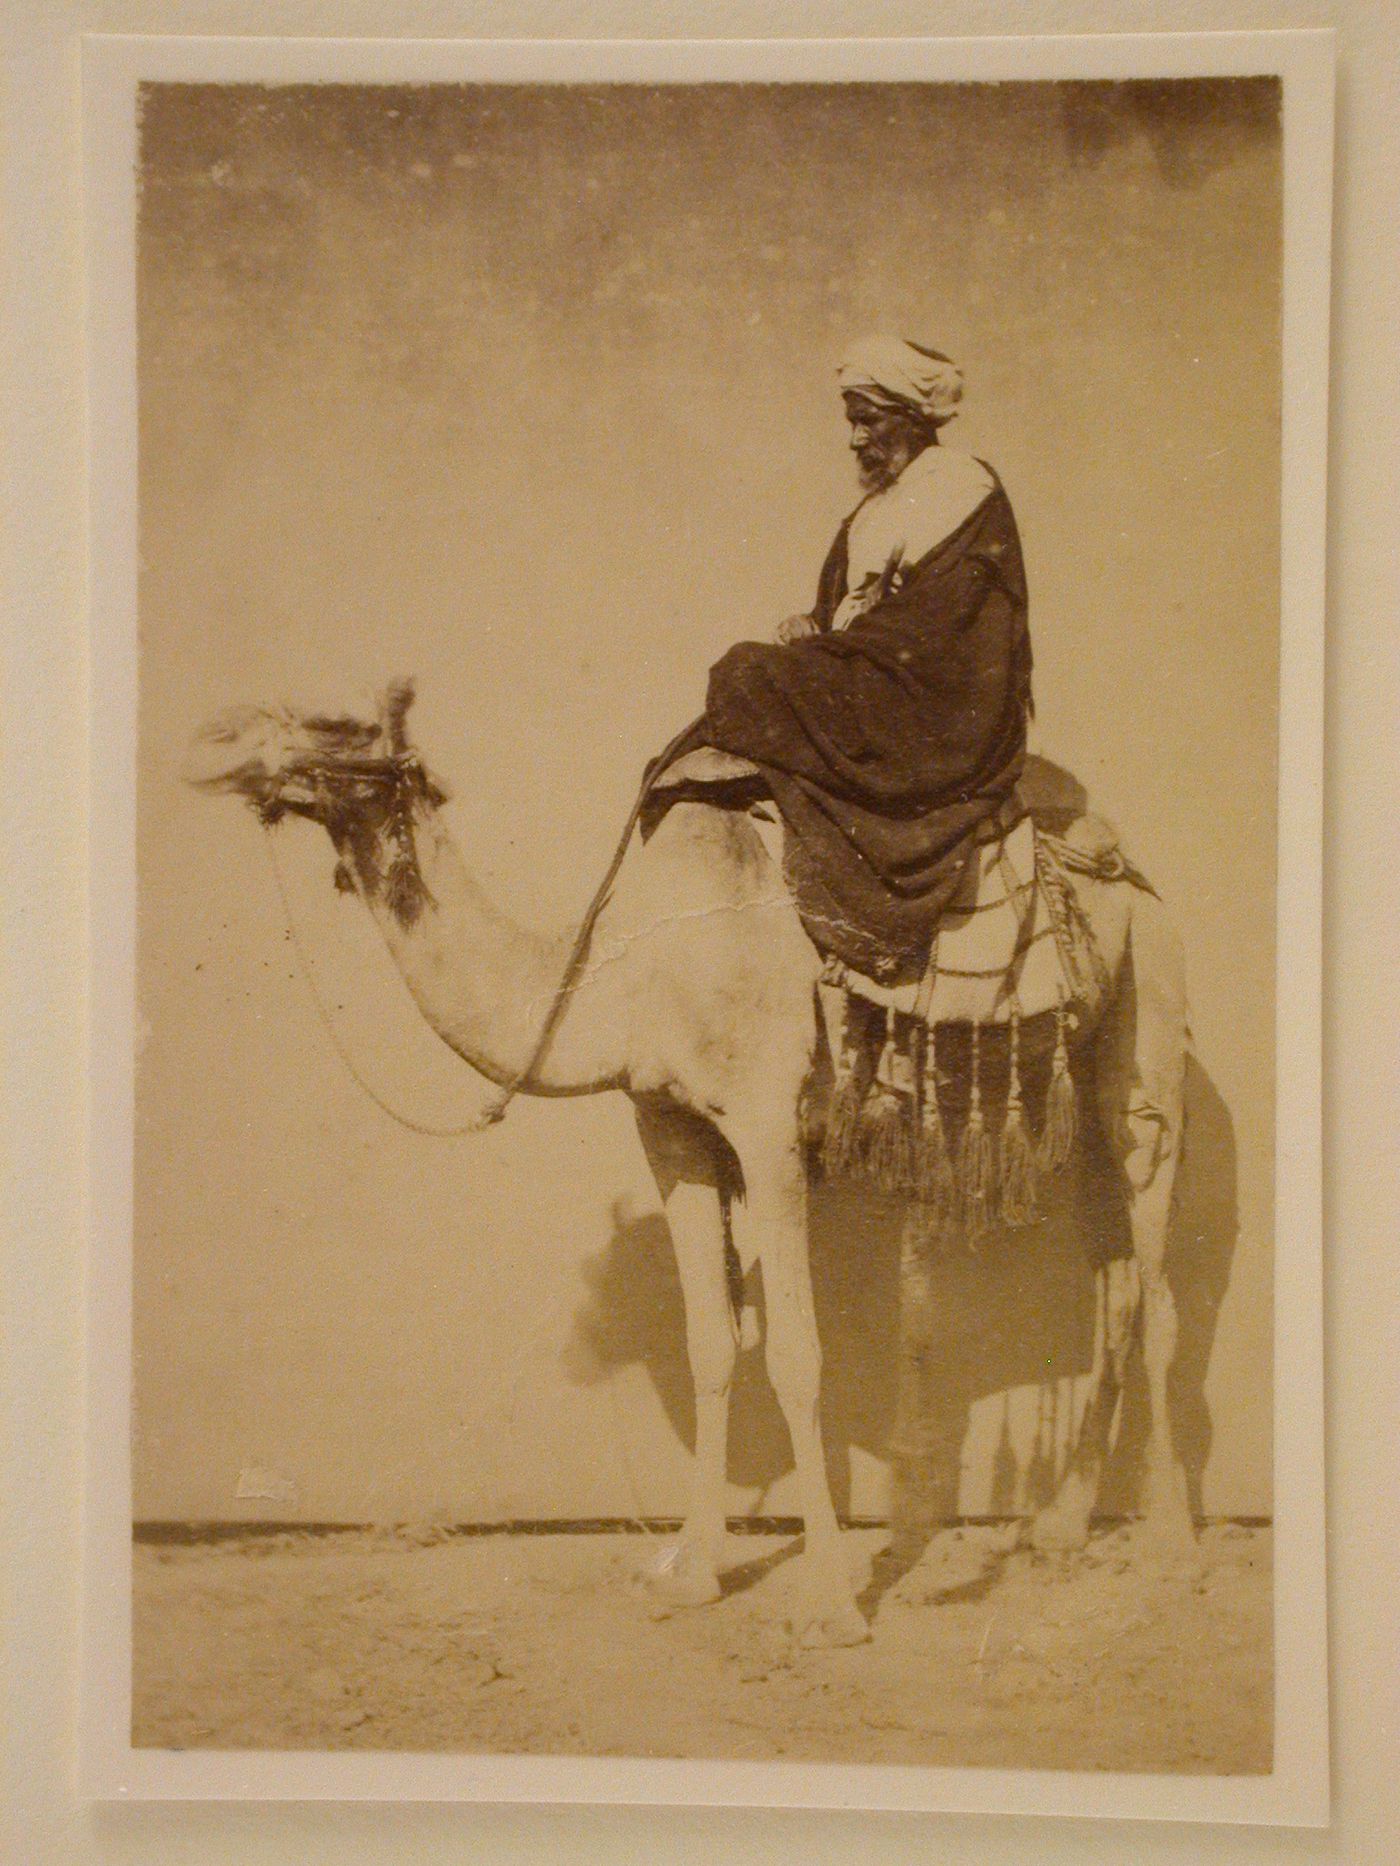 Elderly man seated on a camel